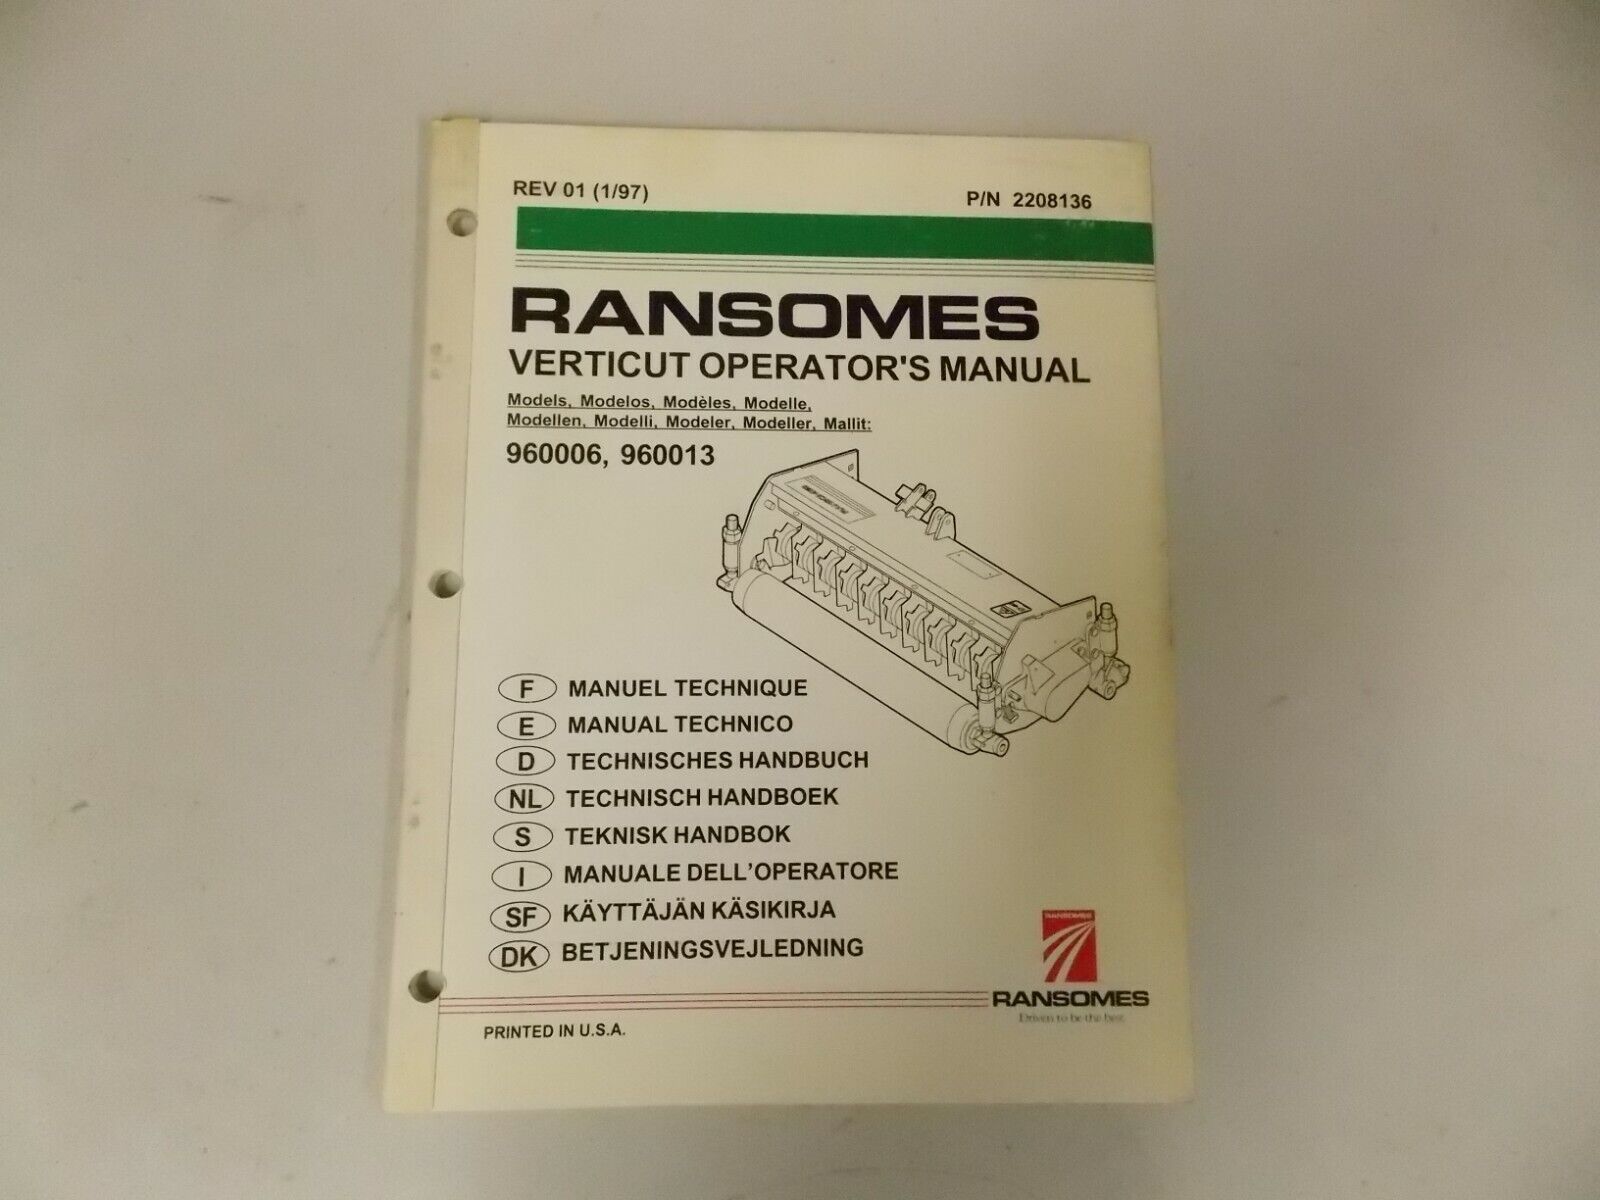 PARTS MANUAL FOR RANSOMES FAIRWAY 250 VERTICUT REELS  MULTIPLE LANGUAGES